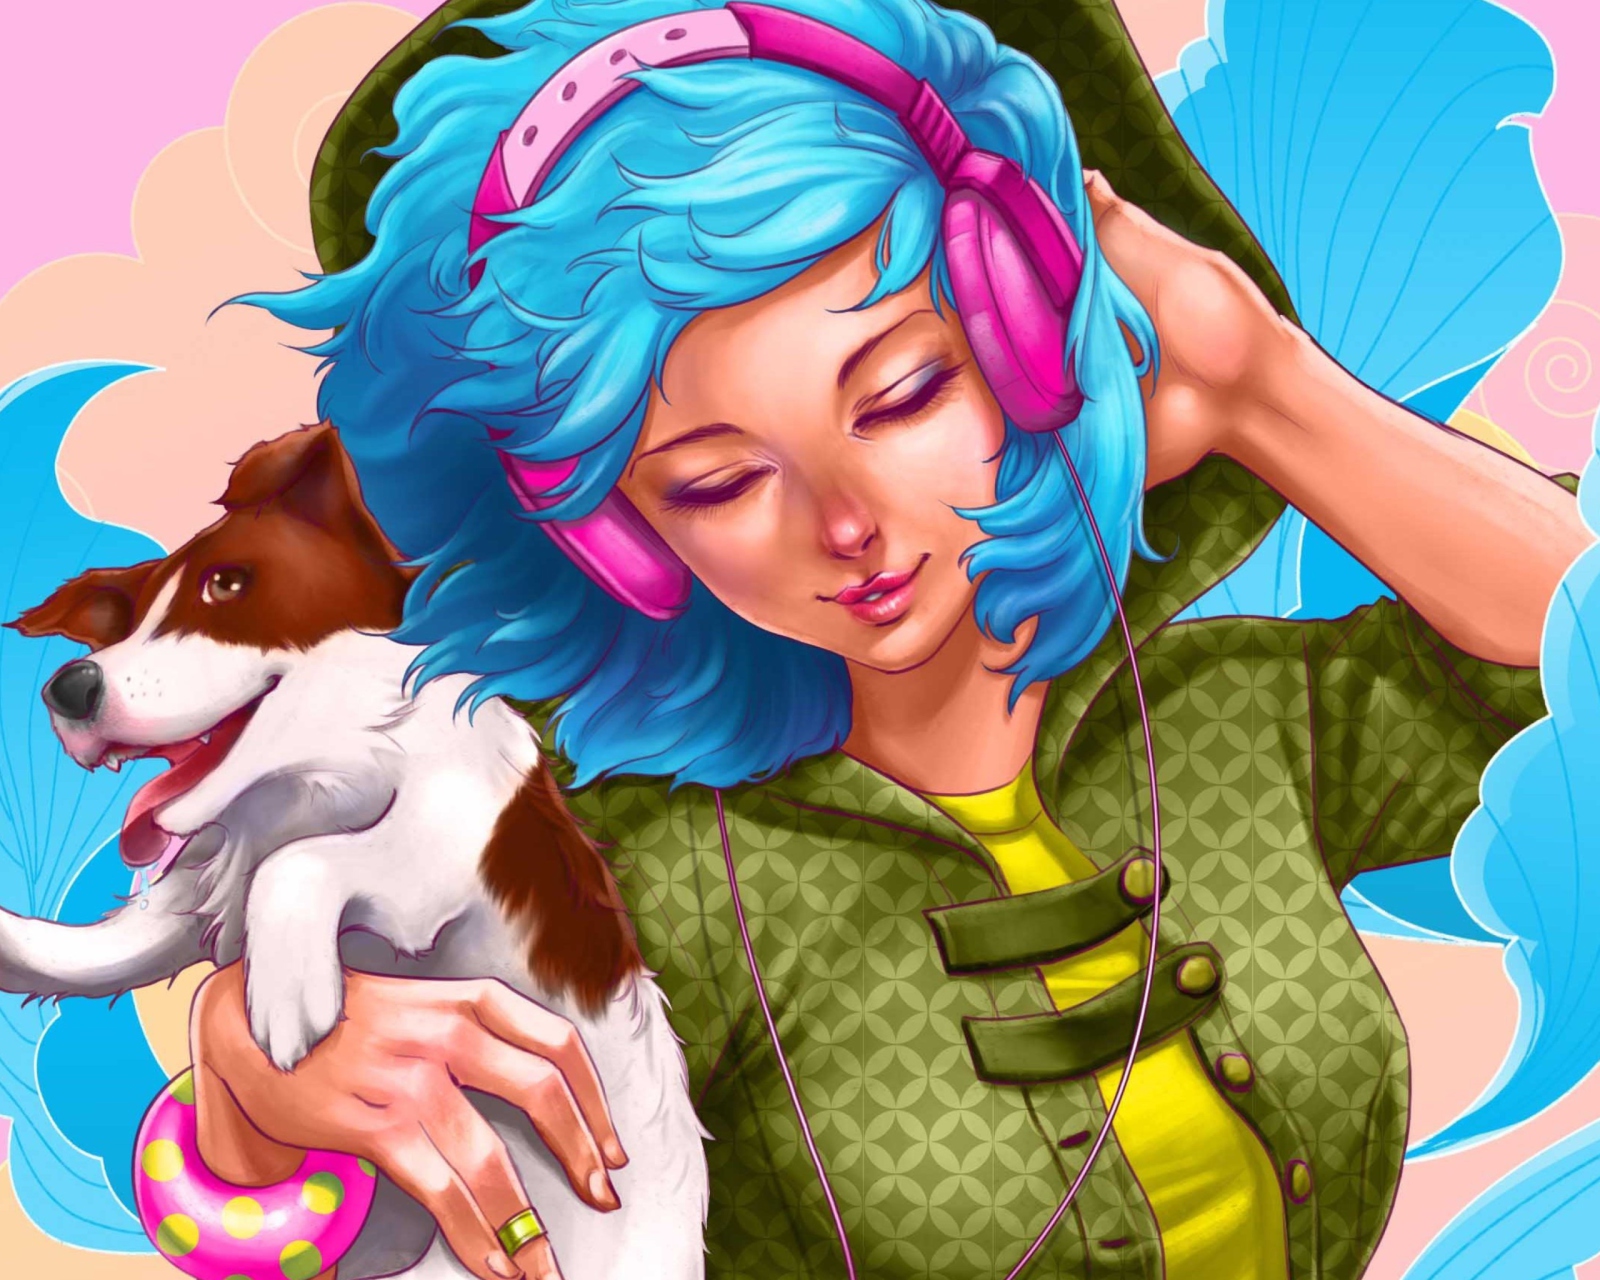 Das Girl With Blue Hair And Pink Headphones Drawing Wallpaper 1600x1280